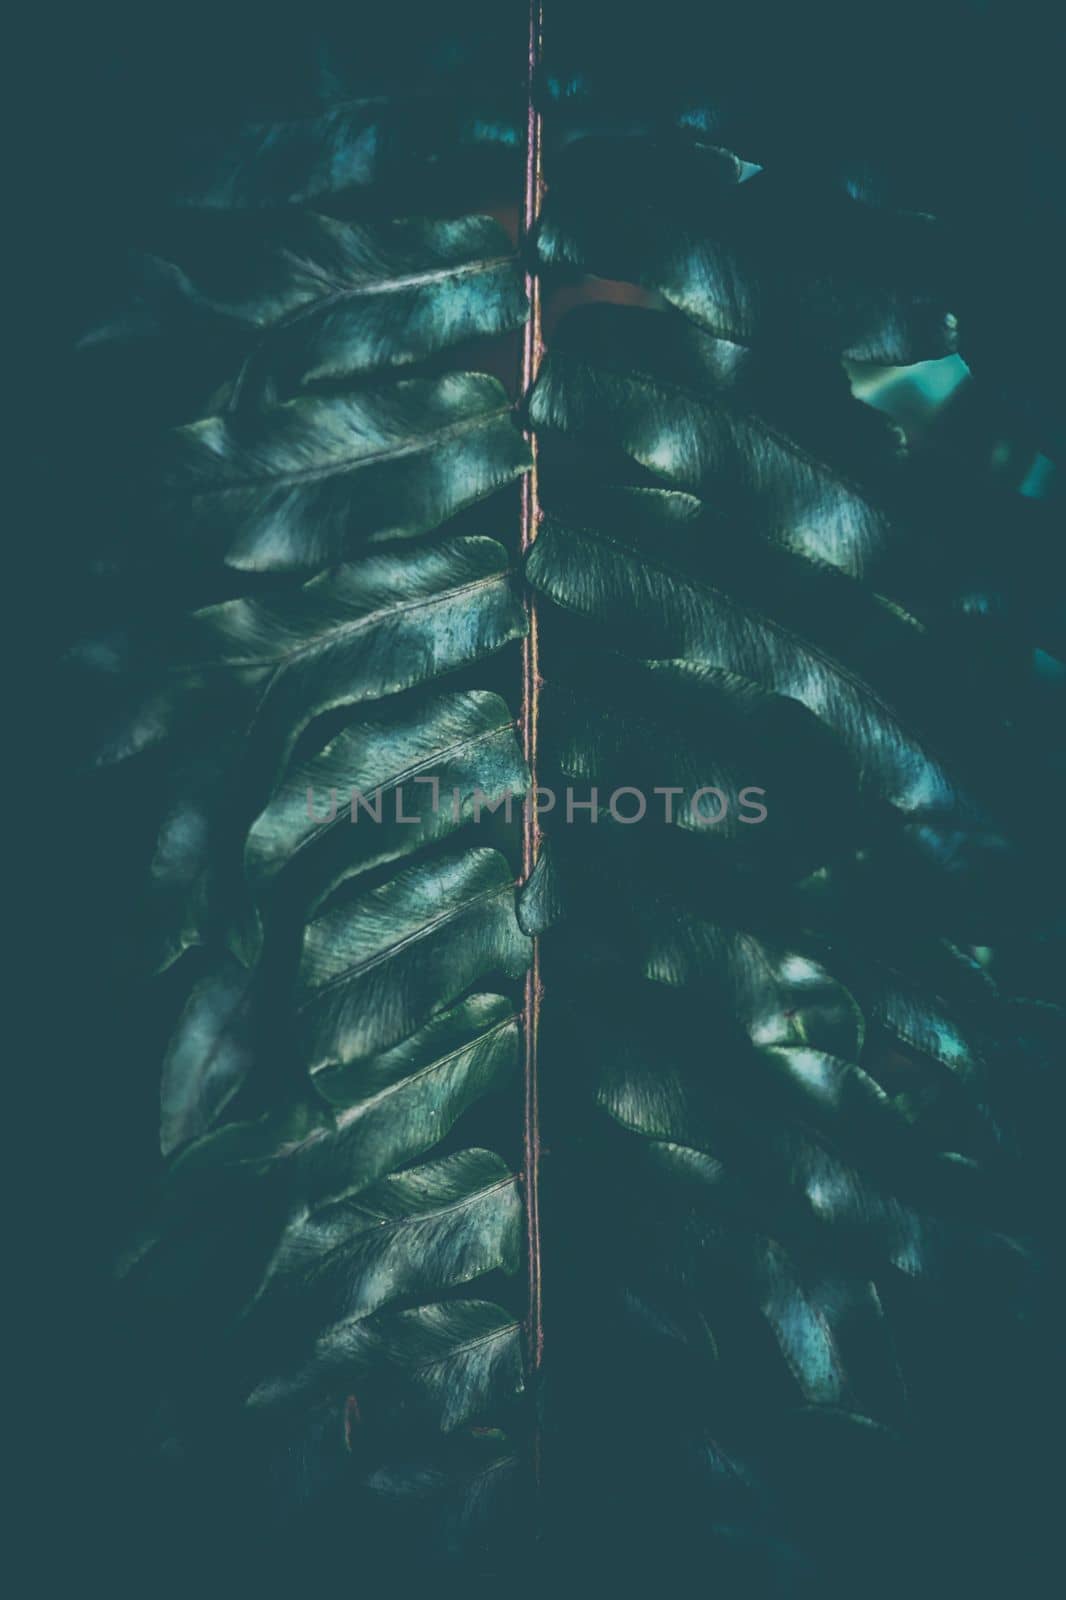 Leaves Background in Dark Contrast with Vintage Style. by mesamong